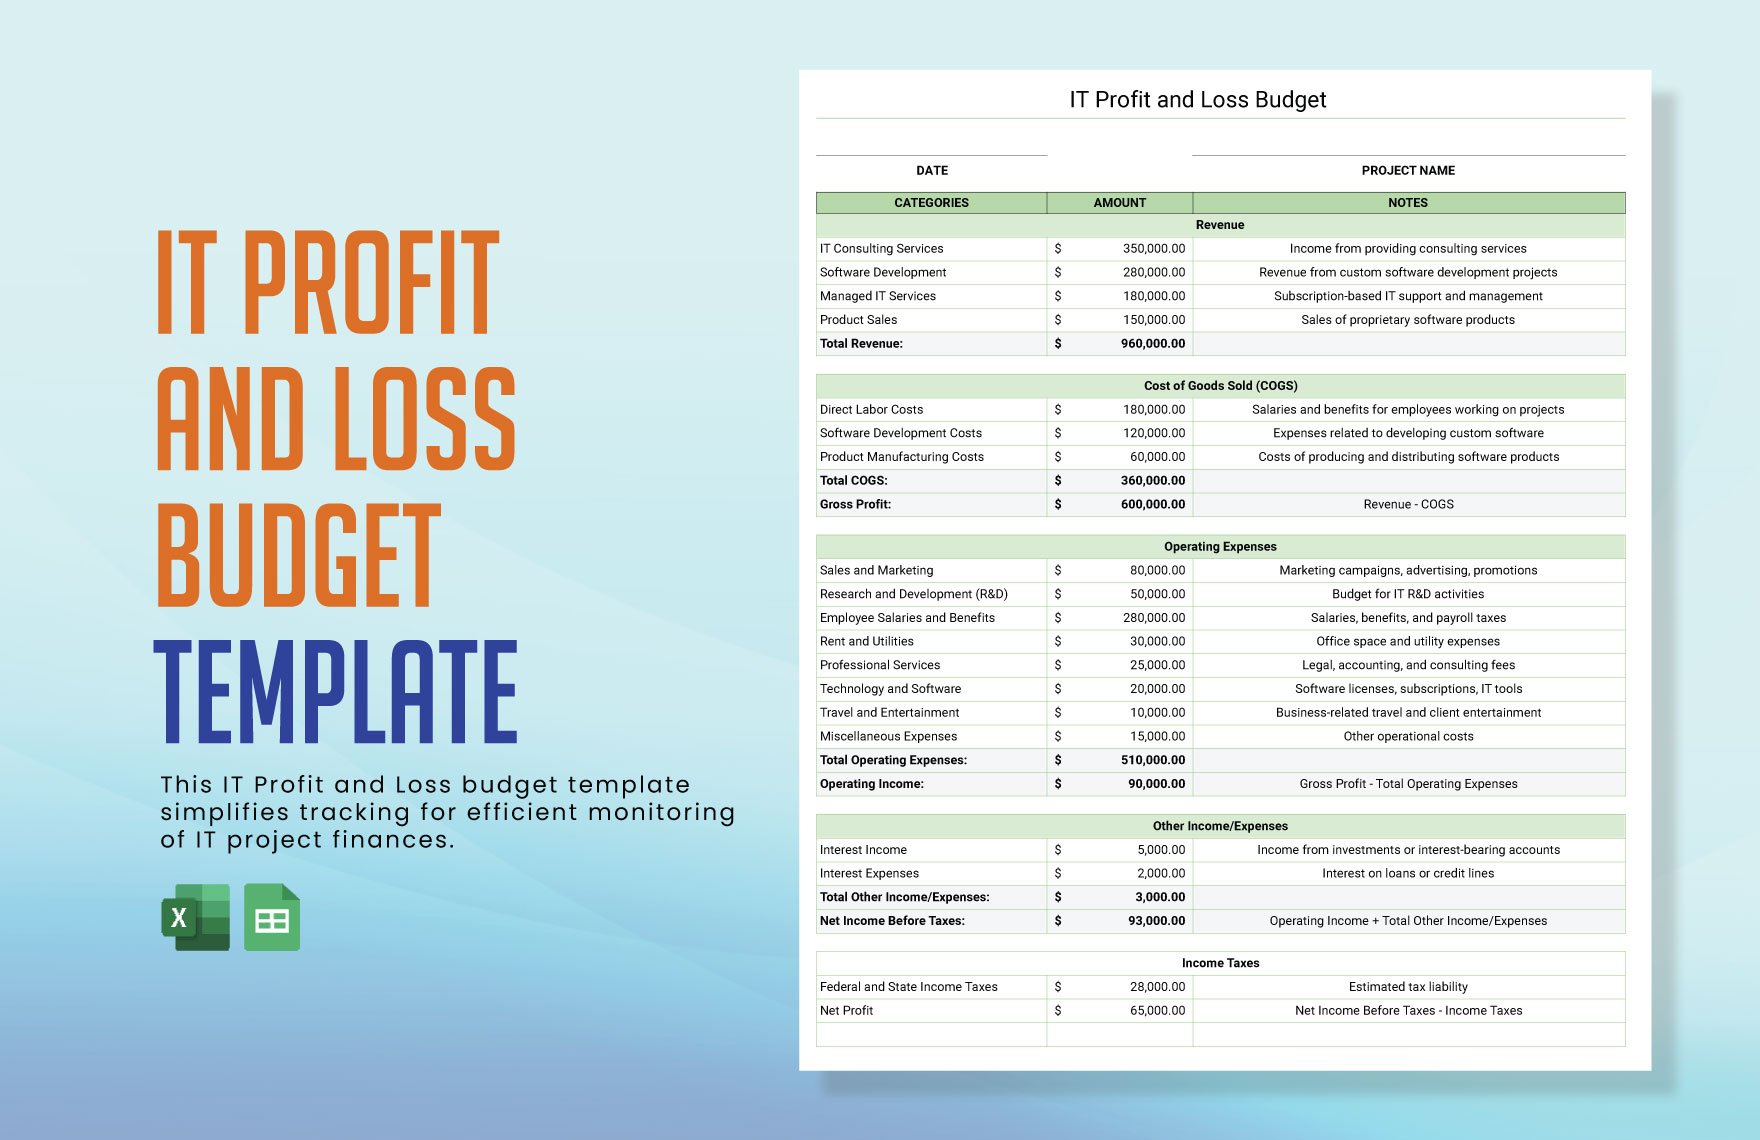 IT Profit and Loss Budget Template in Excel, Google Sheets